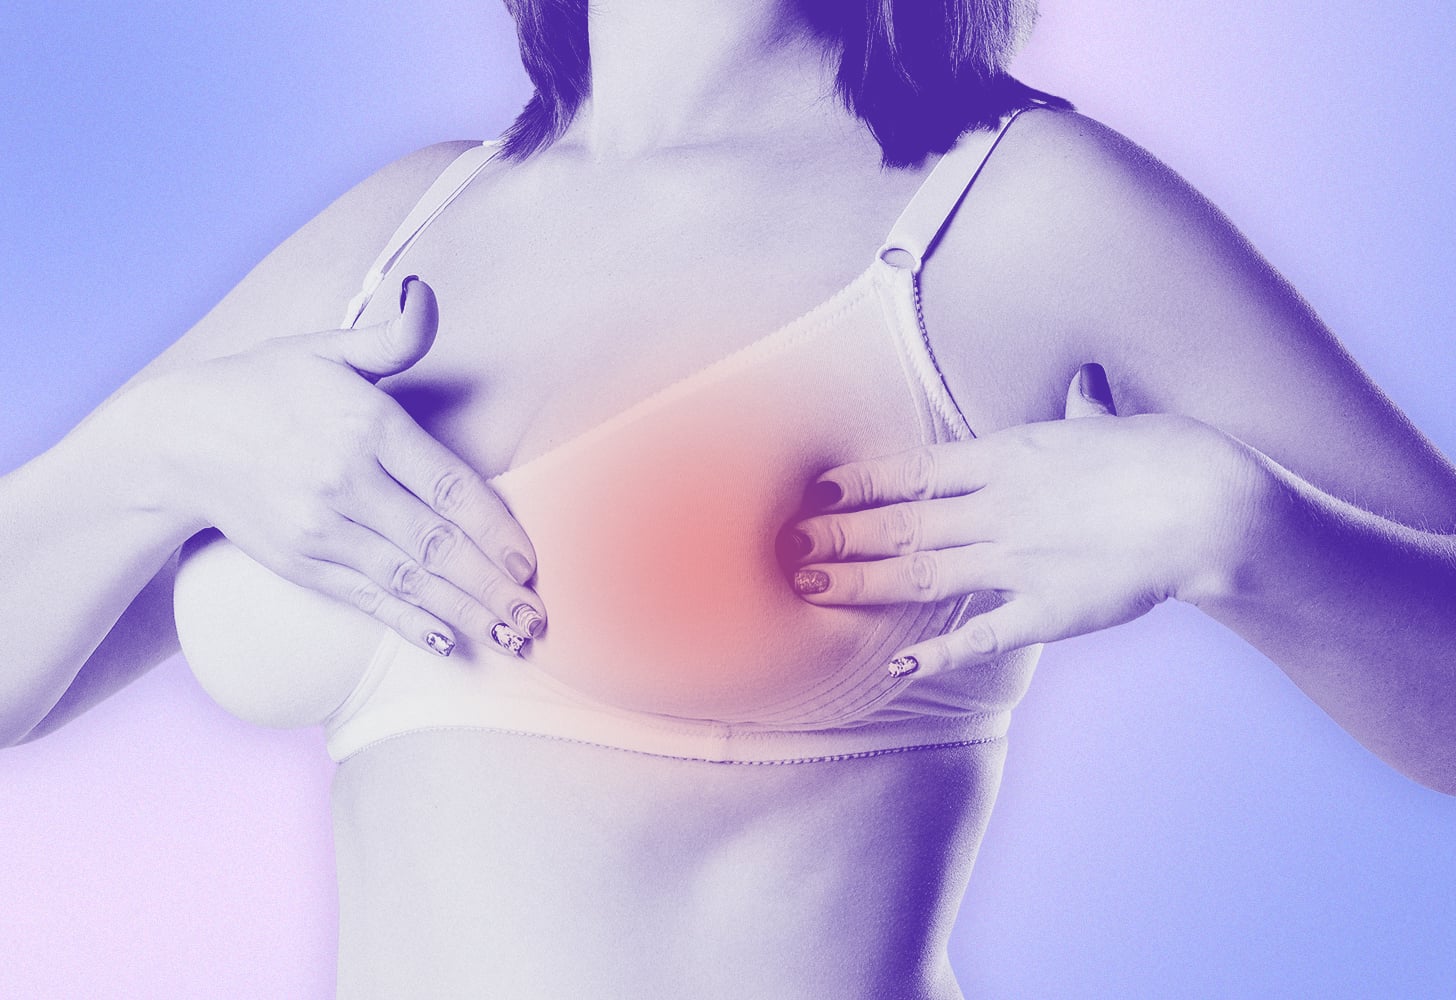 7 symptoms impacted by wearing the wrong bra size in perimenopause